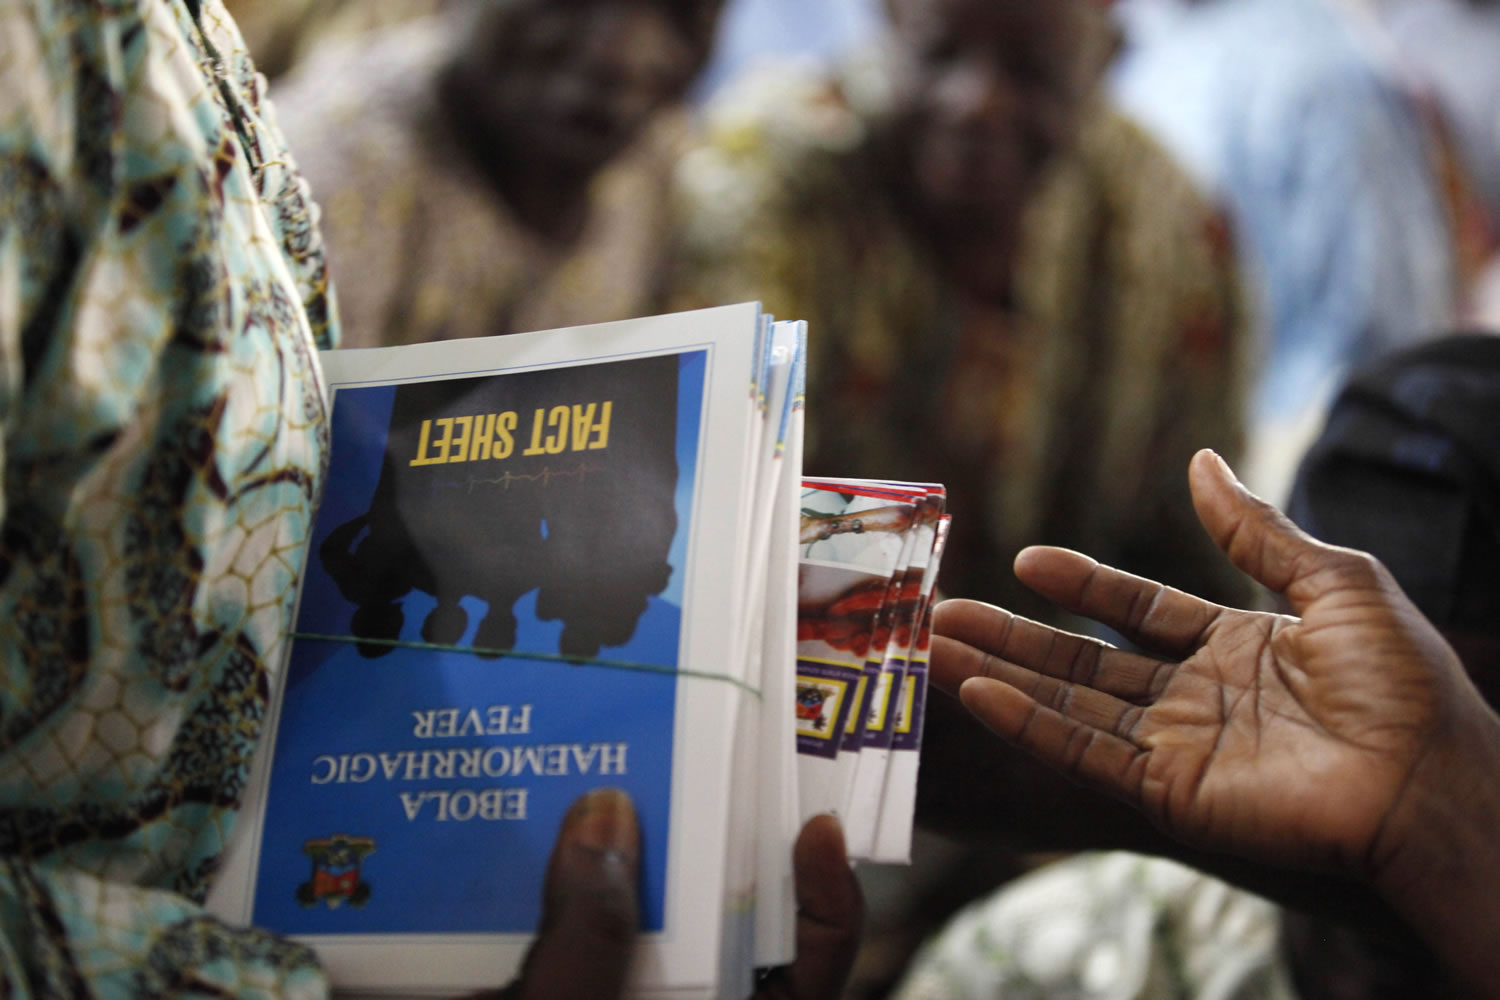 Fact sheets about the Ebola virus are distributed during an awareness campaign Friday in Lagos, Nigeria.